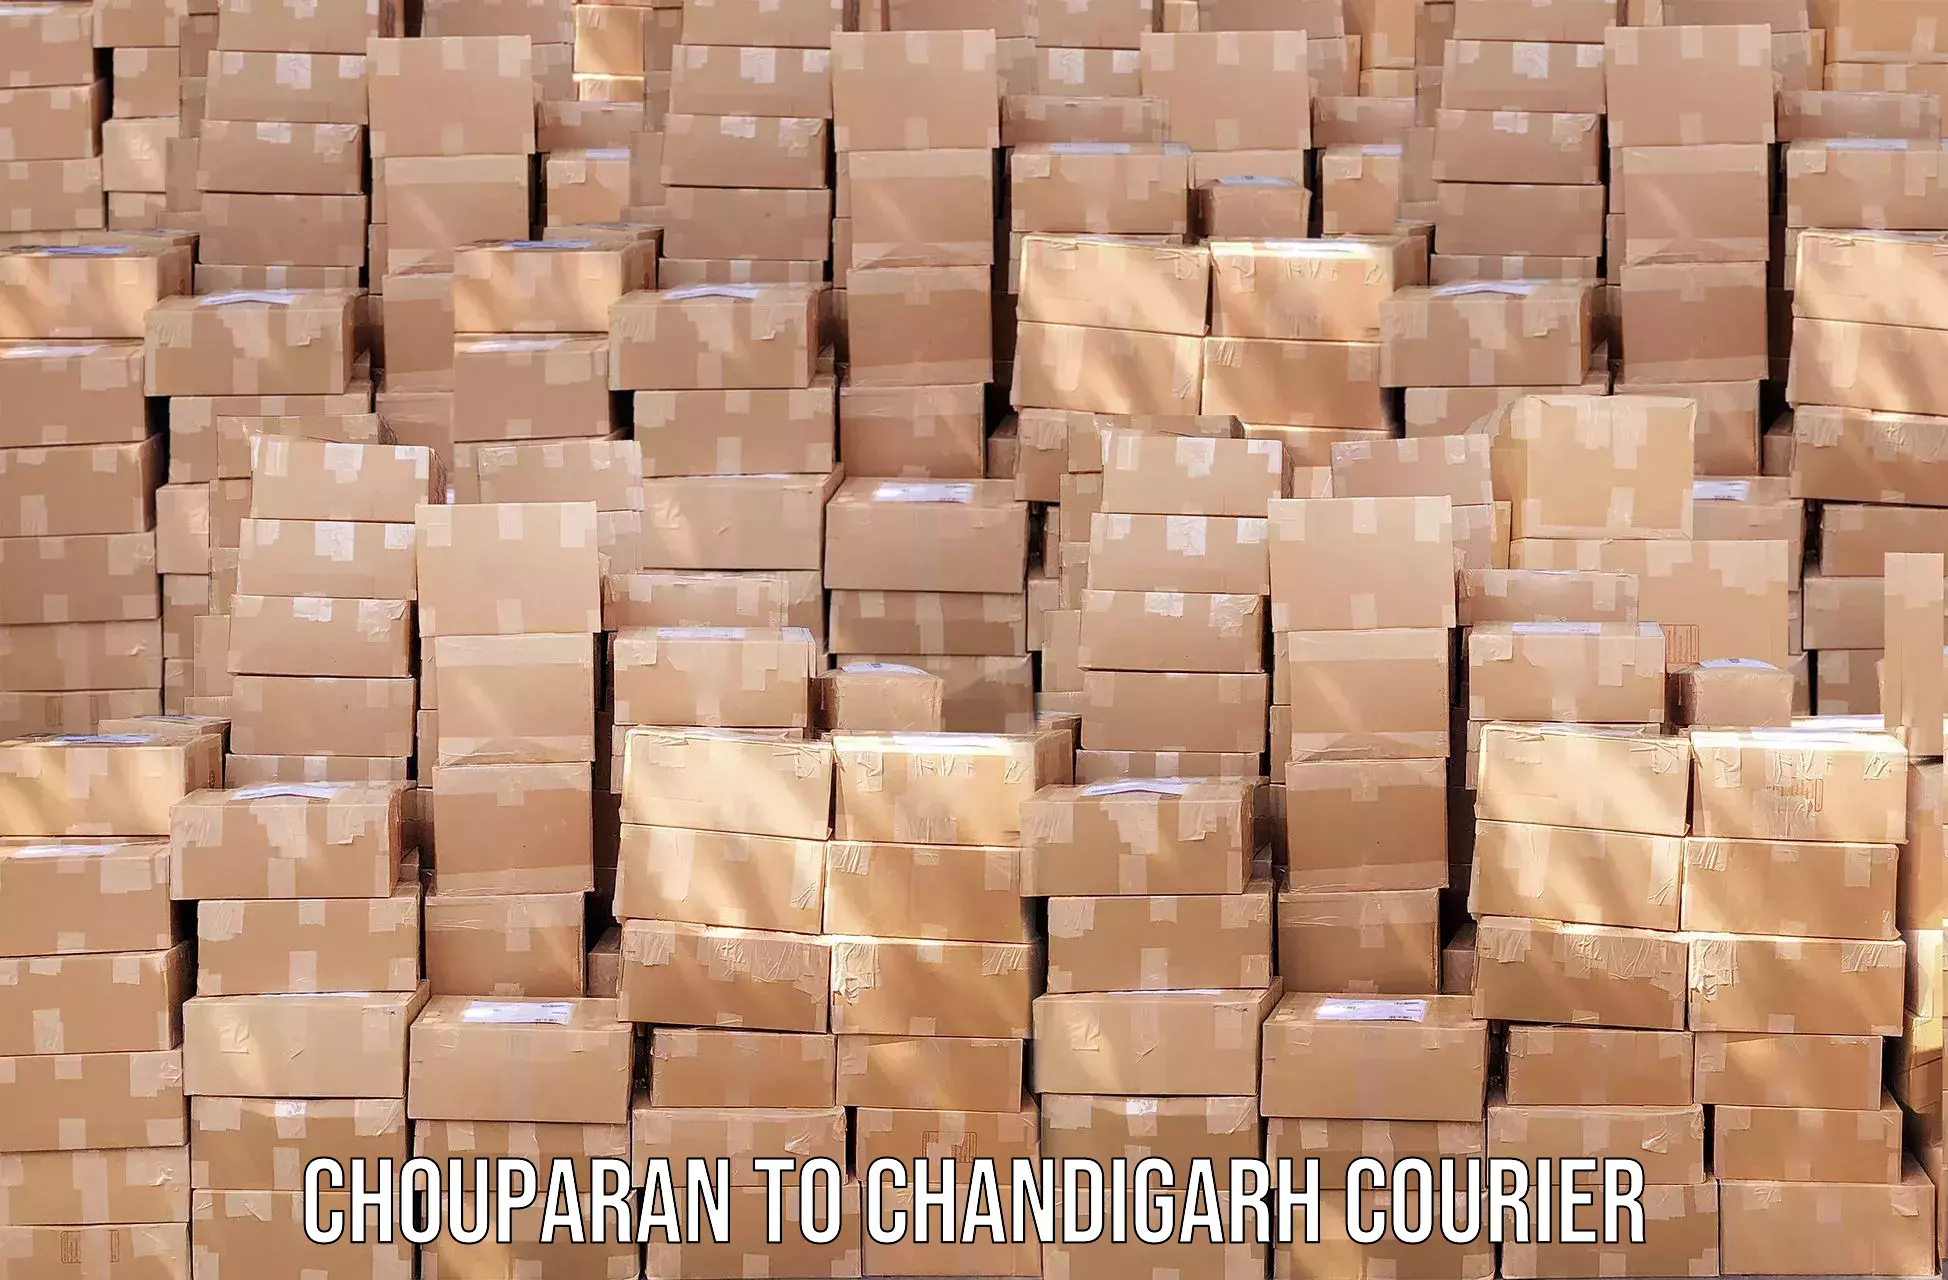 High-speed parcel service Chouparan to Chandigarh